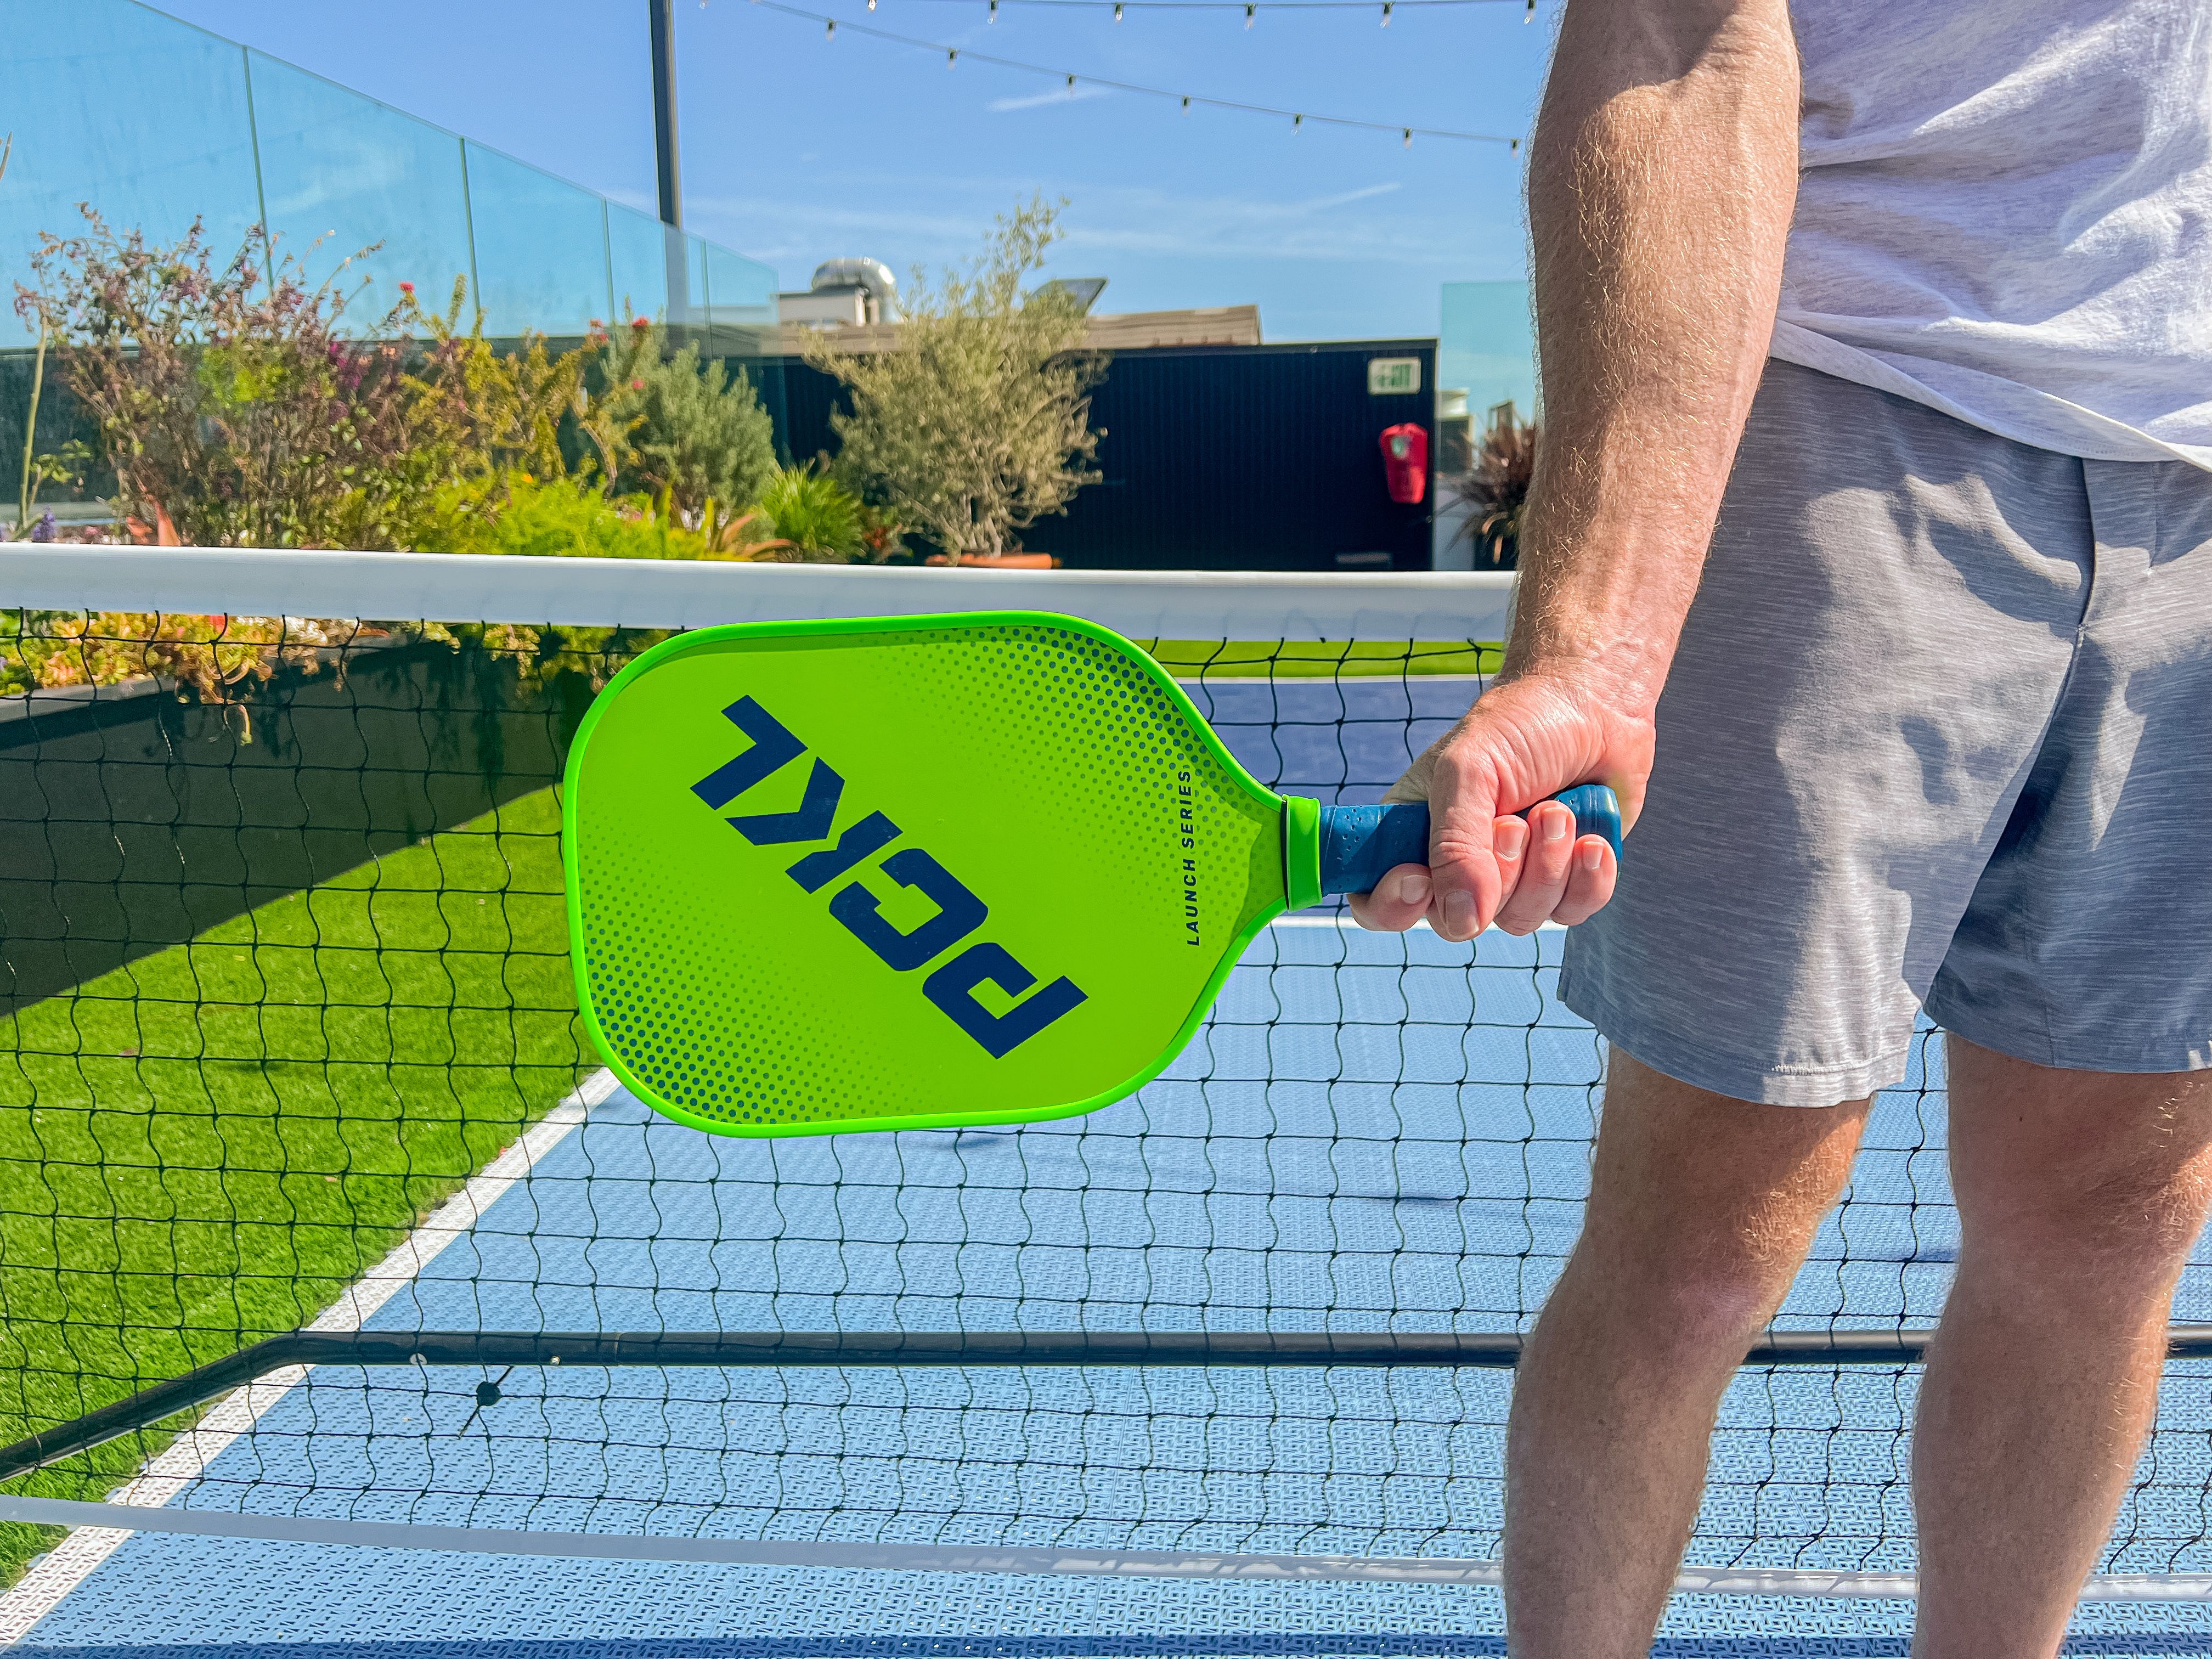 Player demonstrates how to hold the PCKL Launch Series pickleball paddle